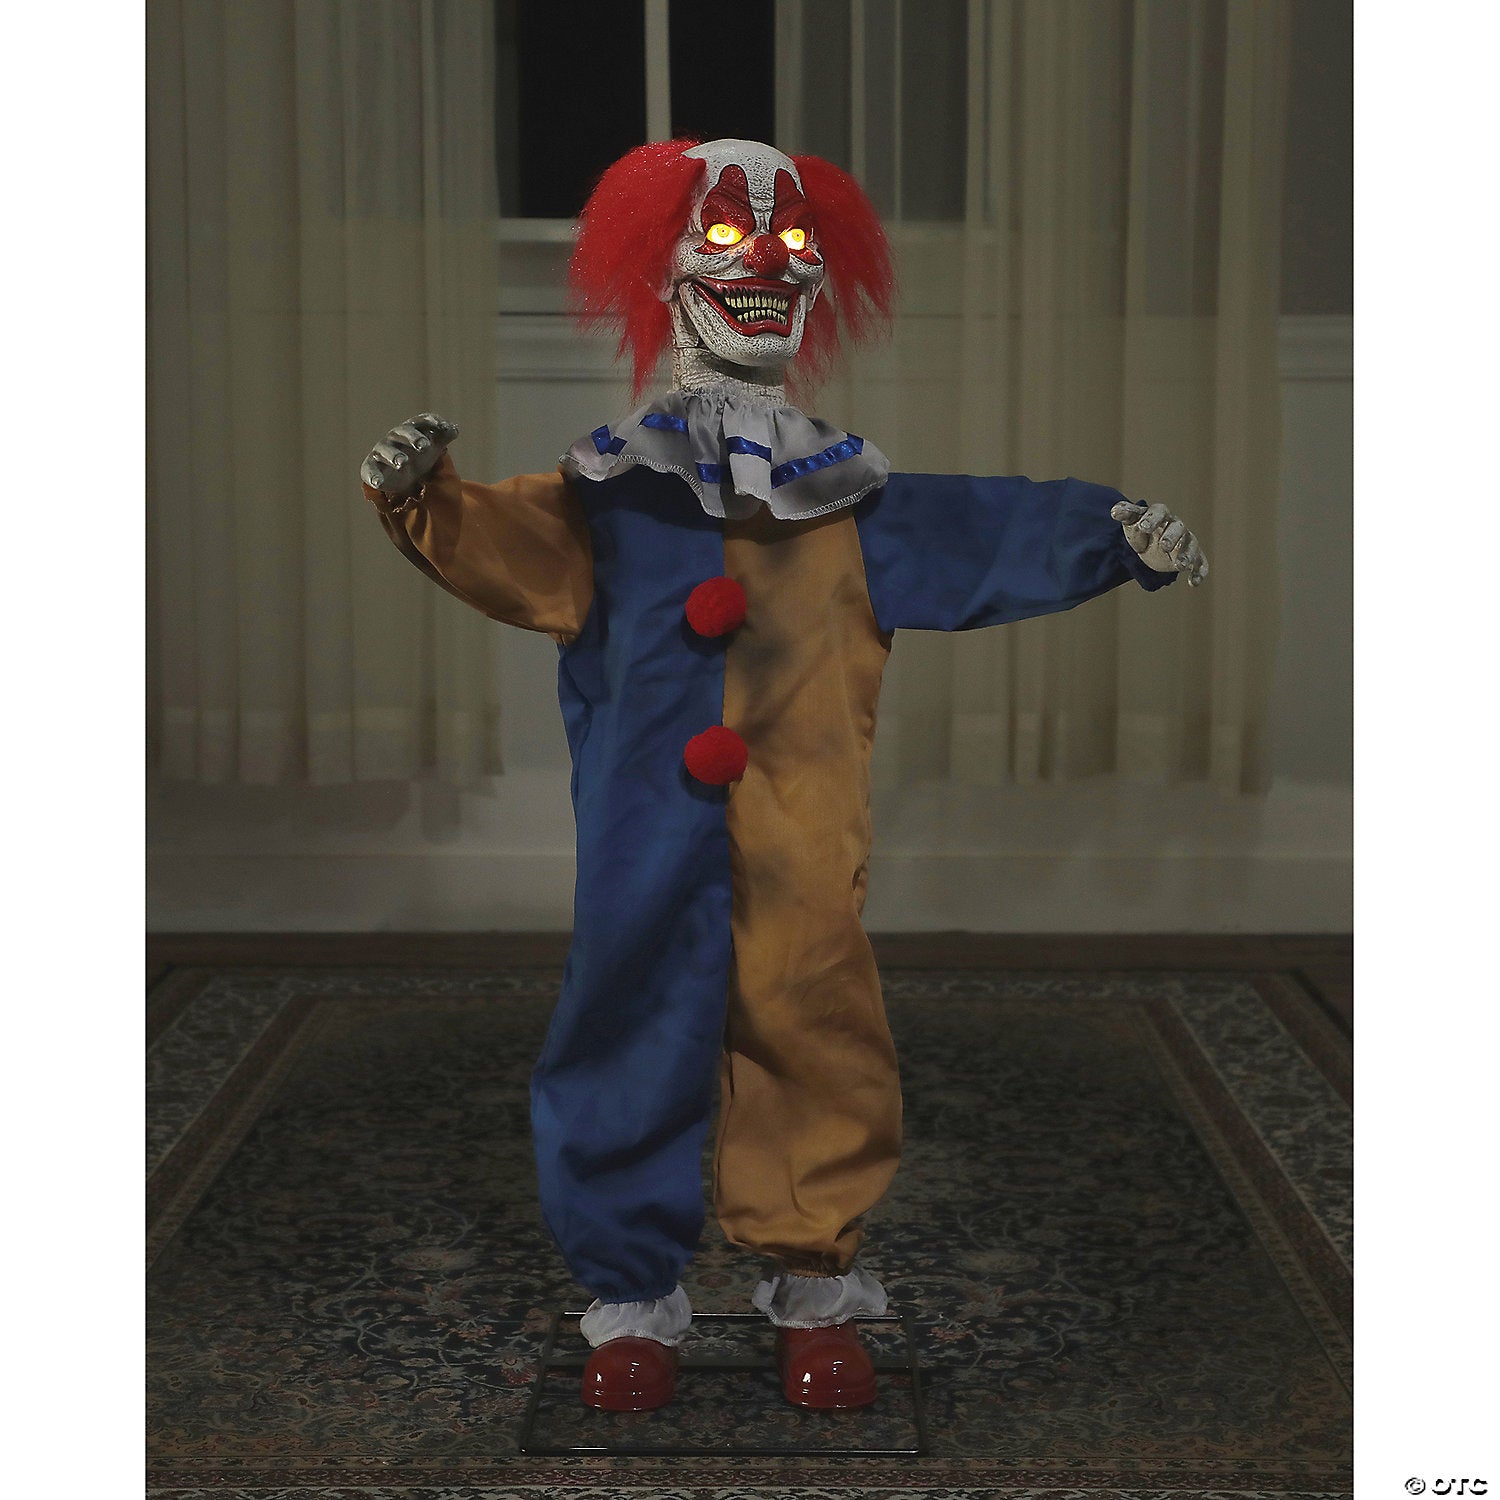 Morris Costumes HOLIDAY: HALLOWEEN 36" Little Top Clown Animated Prop